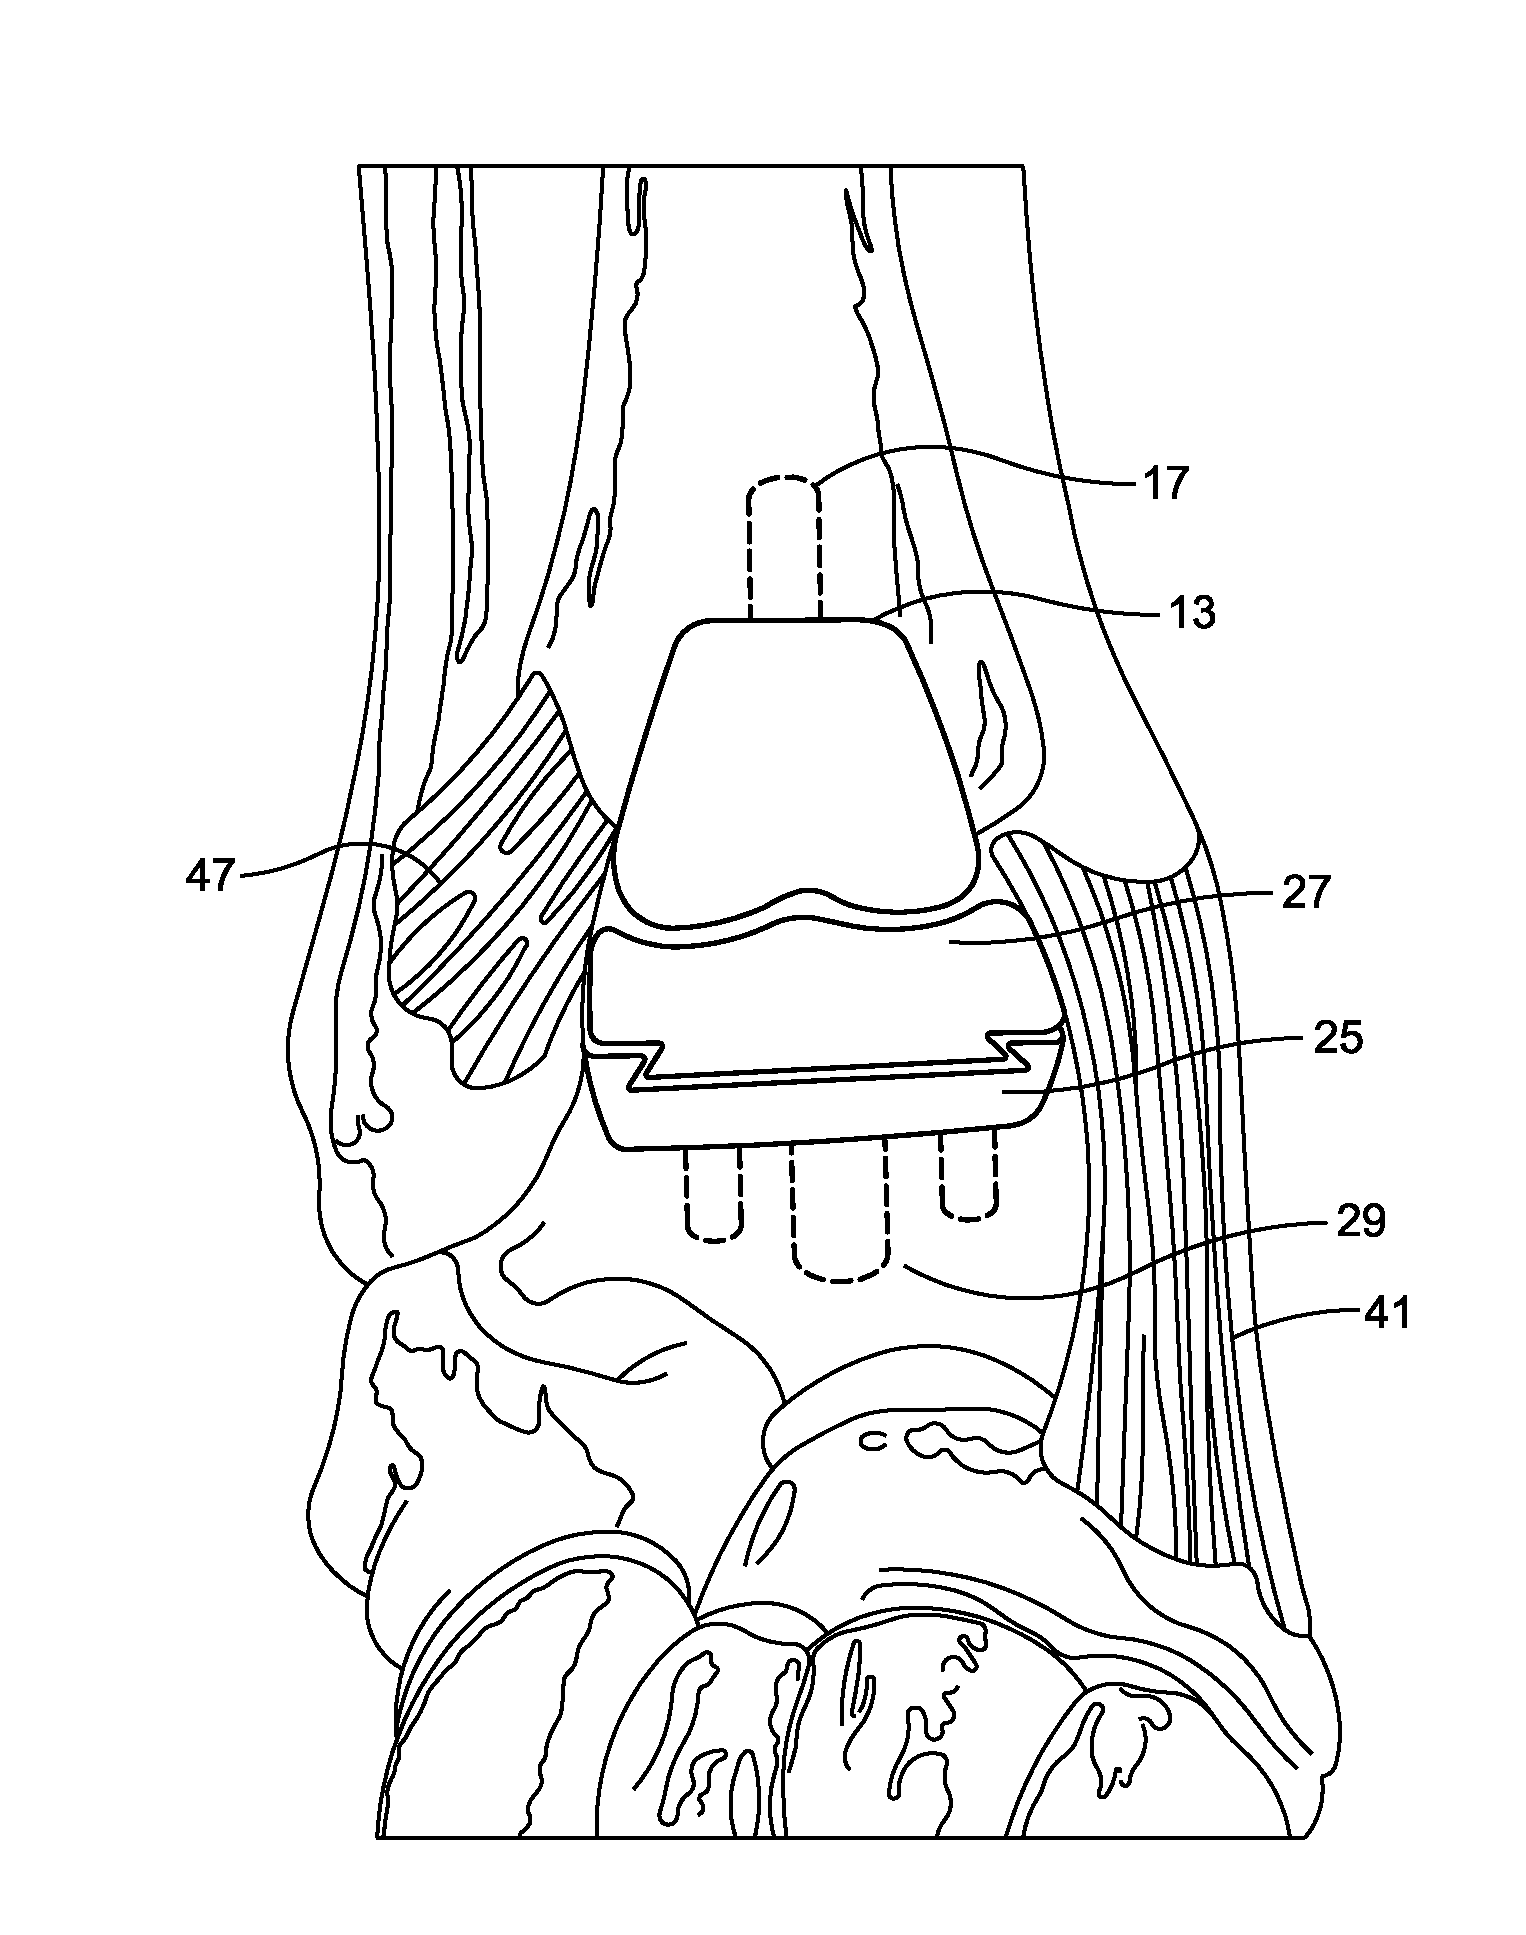 Stabilized total ankle prosthesis